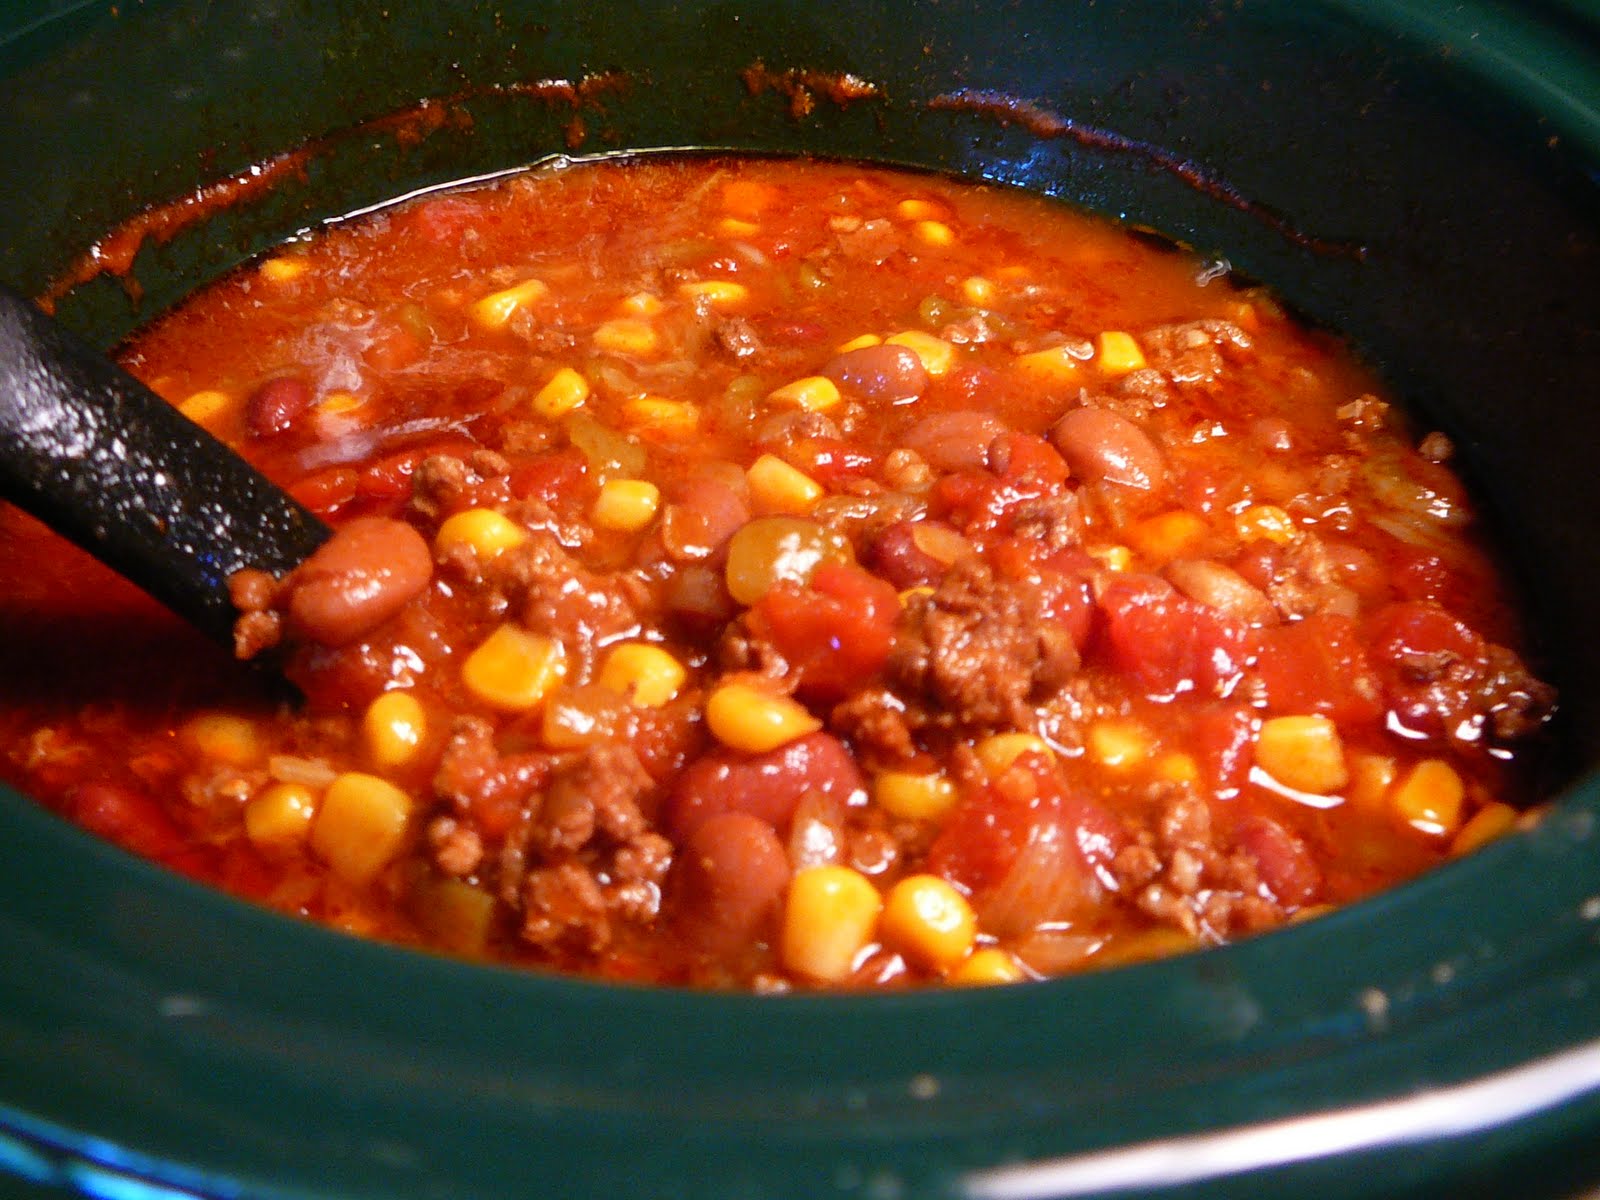 Peacock Coffeehouse: Slow Cooker Taco Soup